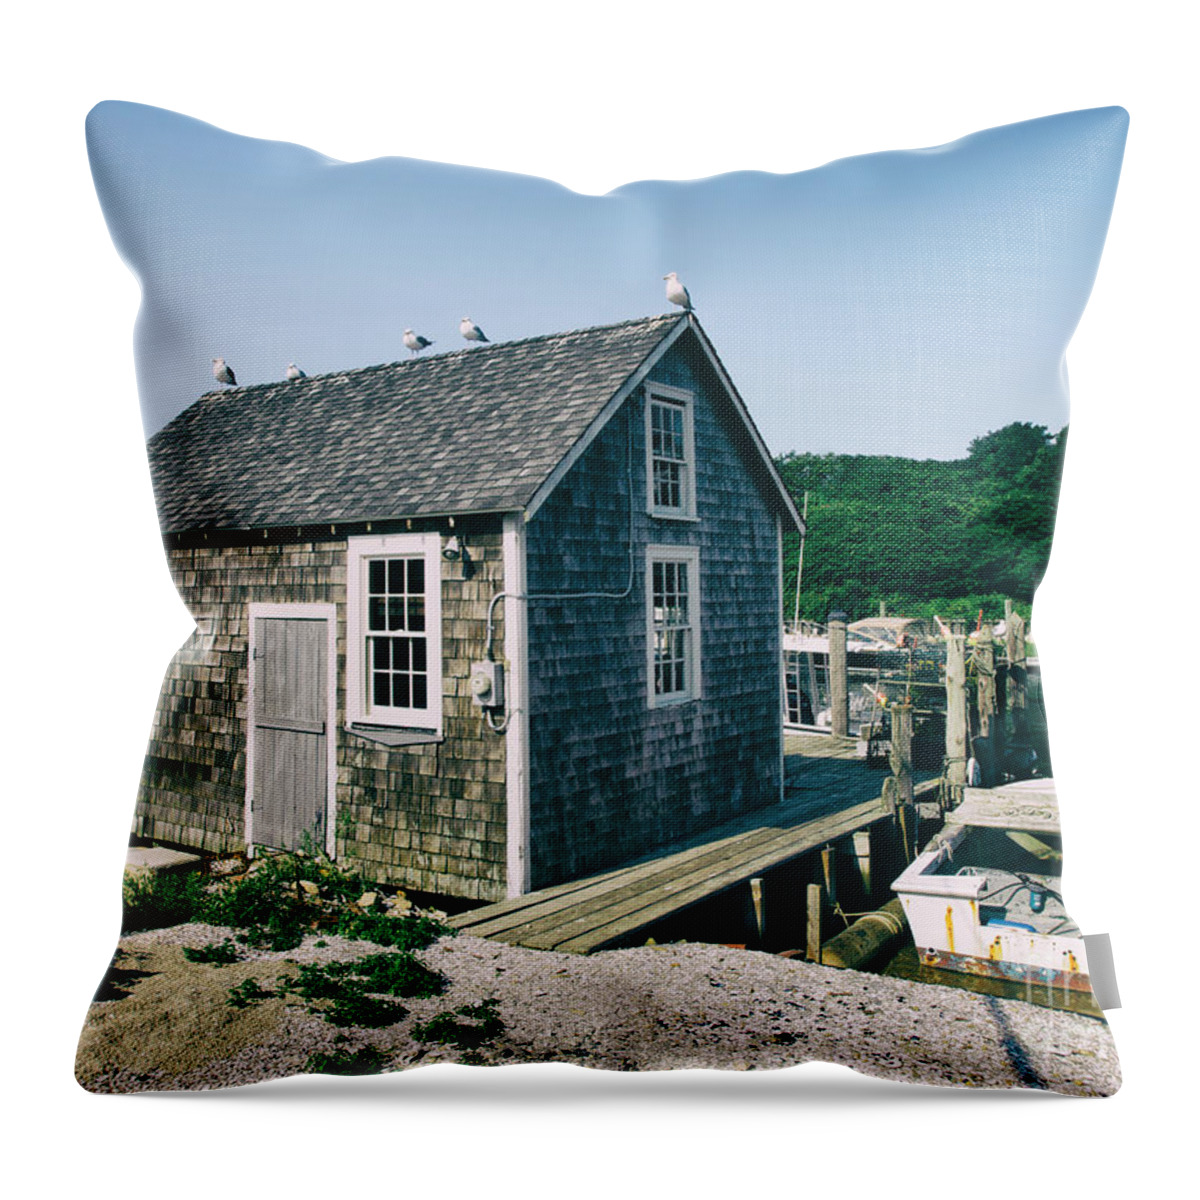 Menemsha Throw Pillow featuring the photograph New England Fishing Cabin by Mark Miller